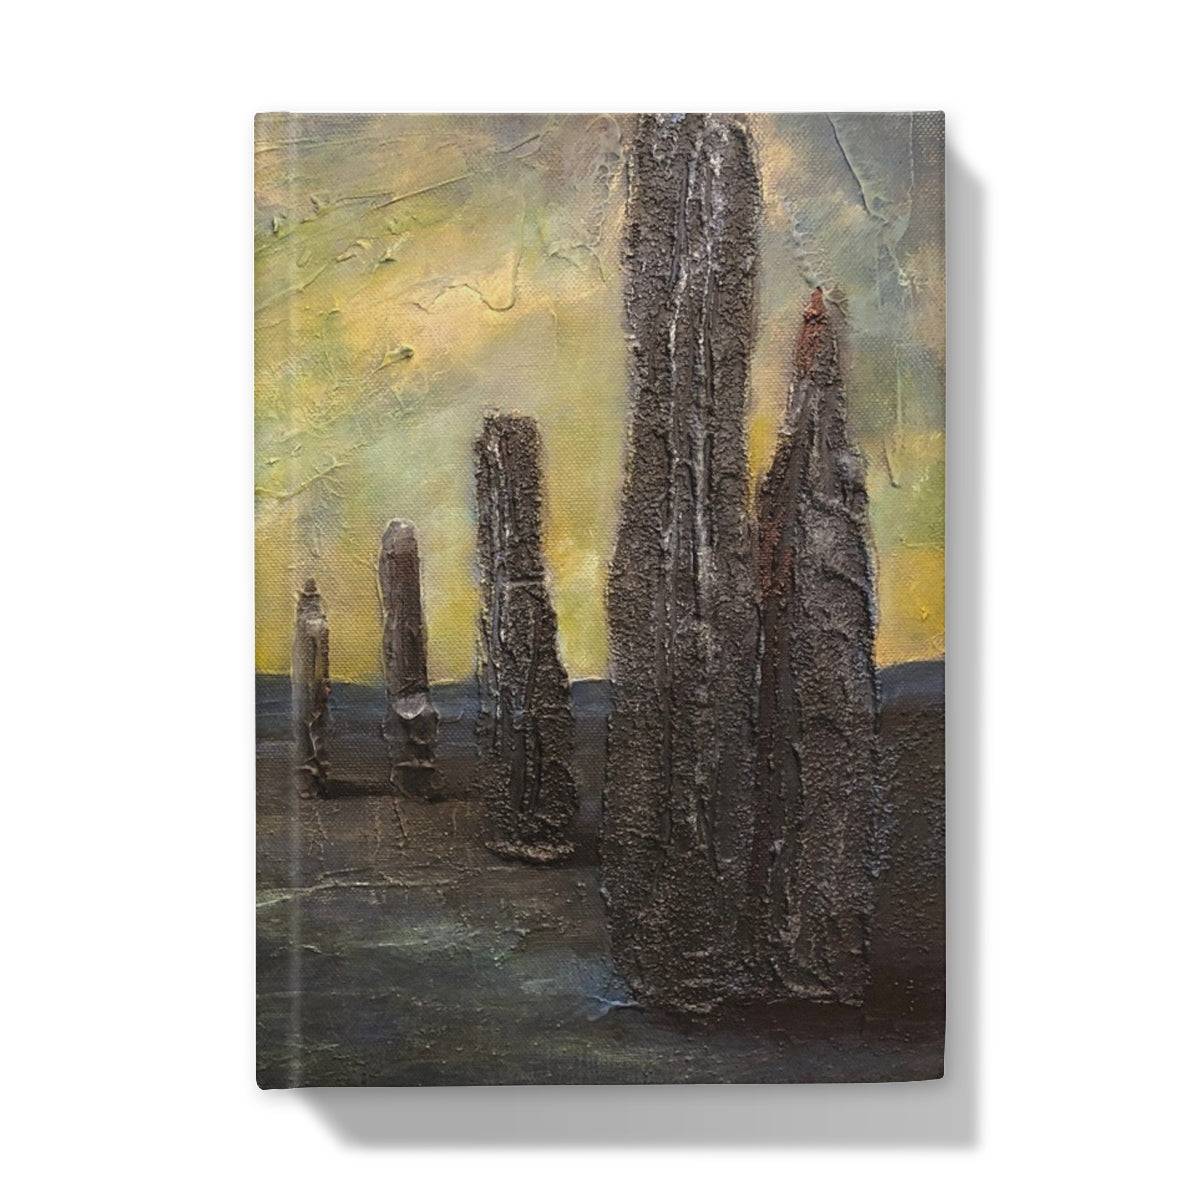 An Ethereal Ring Of Brodgar Art Gifts Hardback Journal-Journals & Notebooks-Orkney Art Gallery-A5-Lined-Paintings, Prints, Homeware, Art Gifts From Scotland By Scottish Artist Kevin Hunter